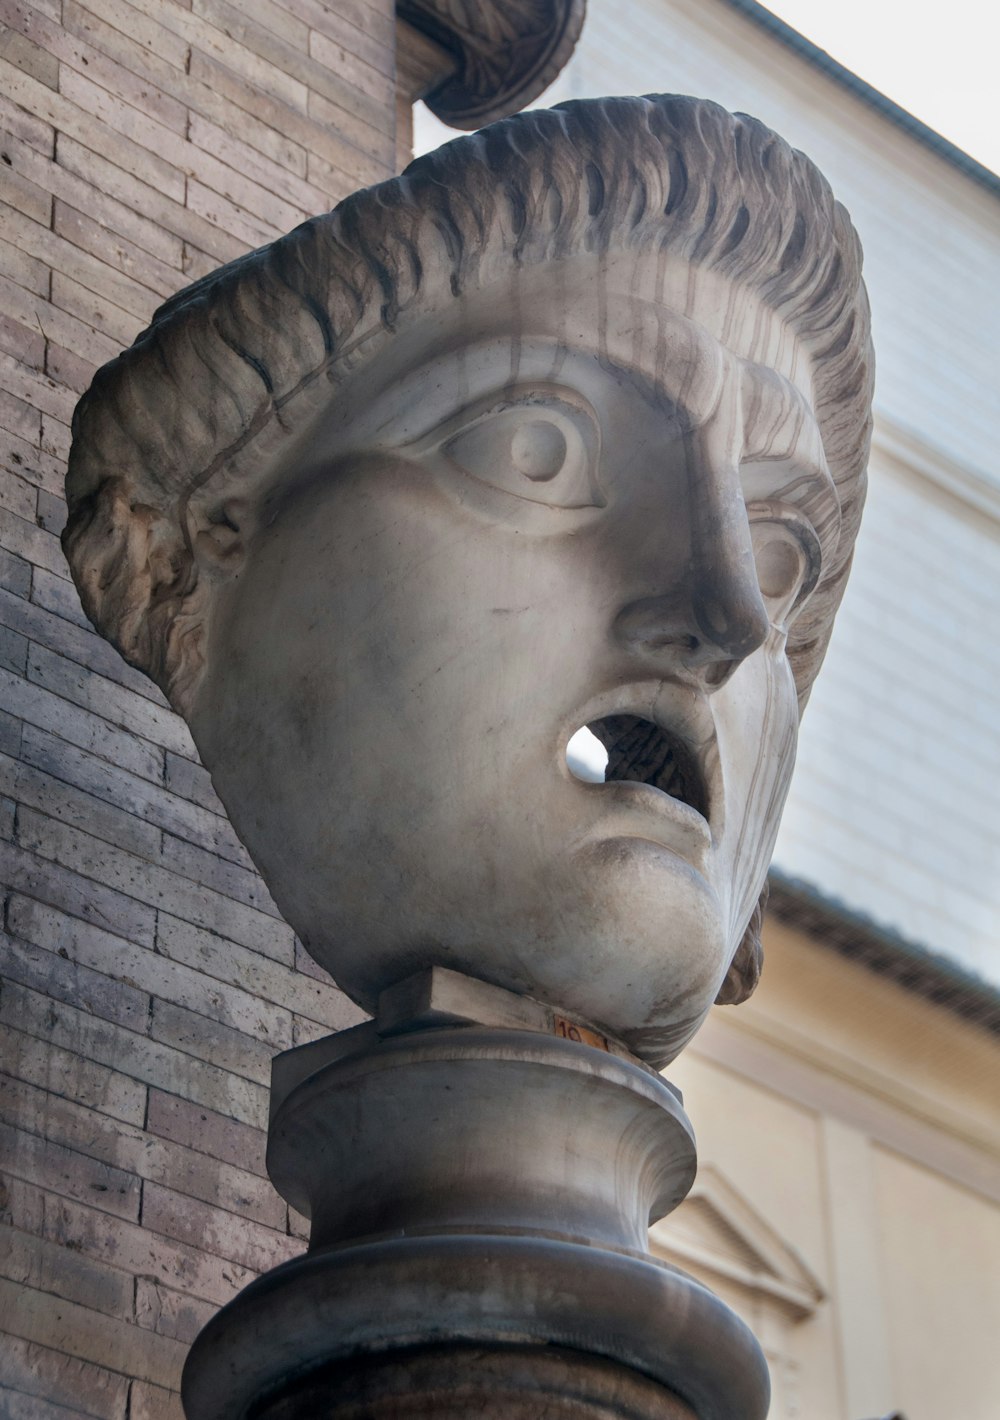 a close up of a statue of a man's head